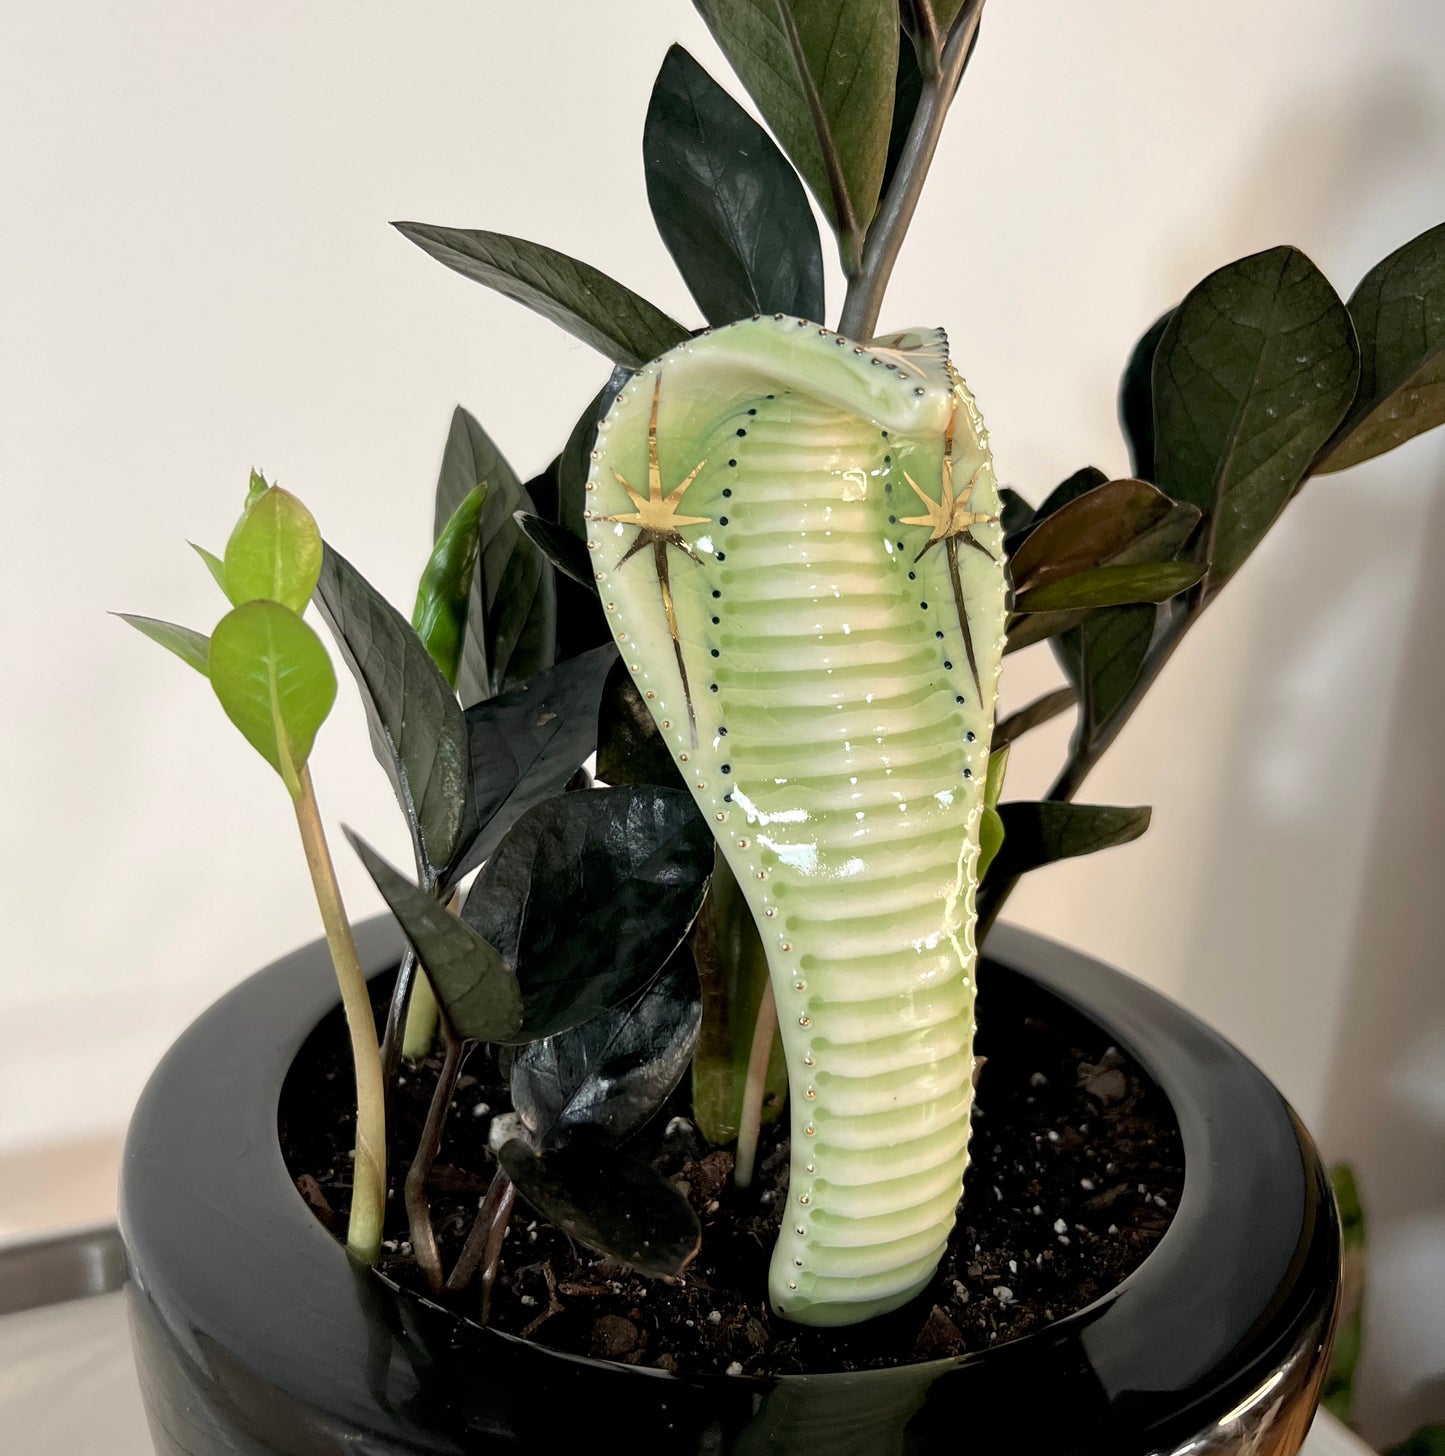 Product Image: Planter Snake 6 - Hand crafted Porcelain Home Ornament. Snake with Brass Rod for placing in pots with plants.